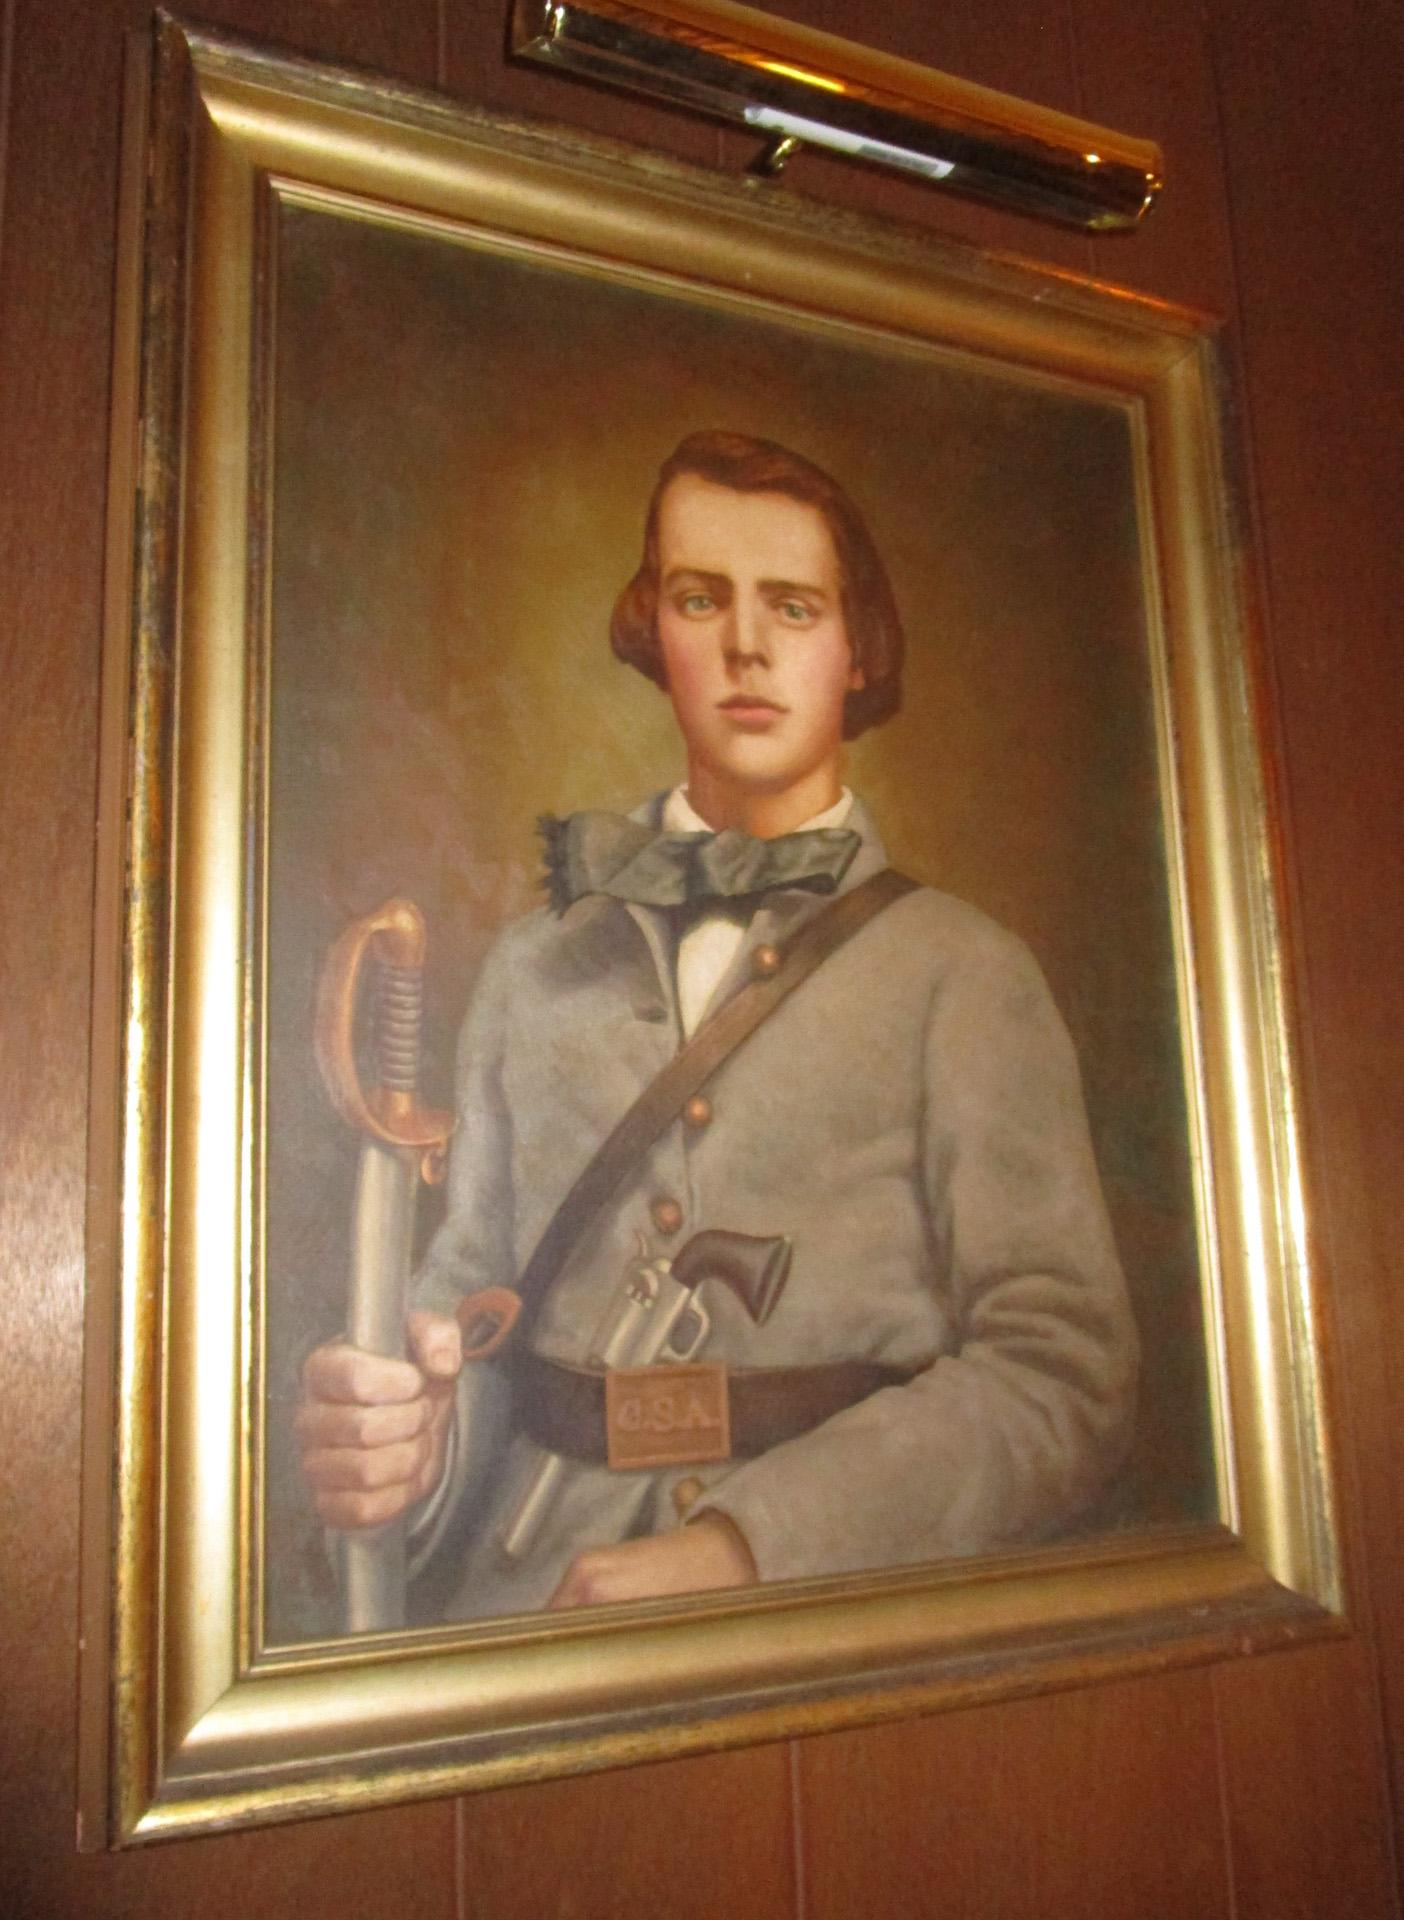 19th C American Civil War Confederate Soldier Framed Oil Painting w/ Provenance 1